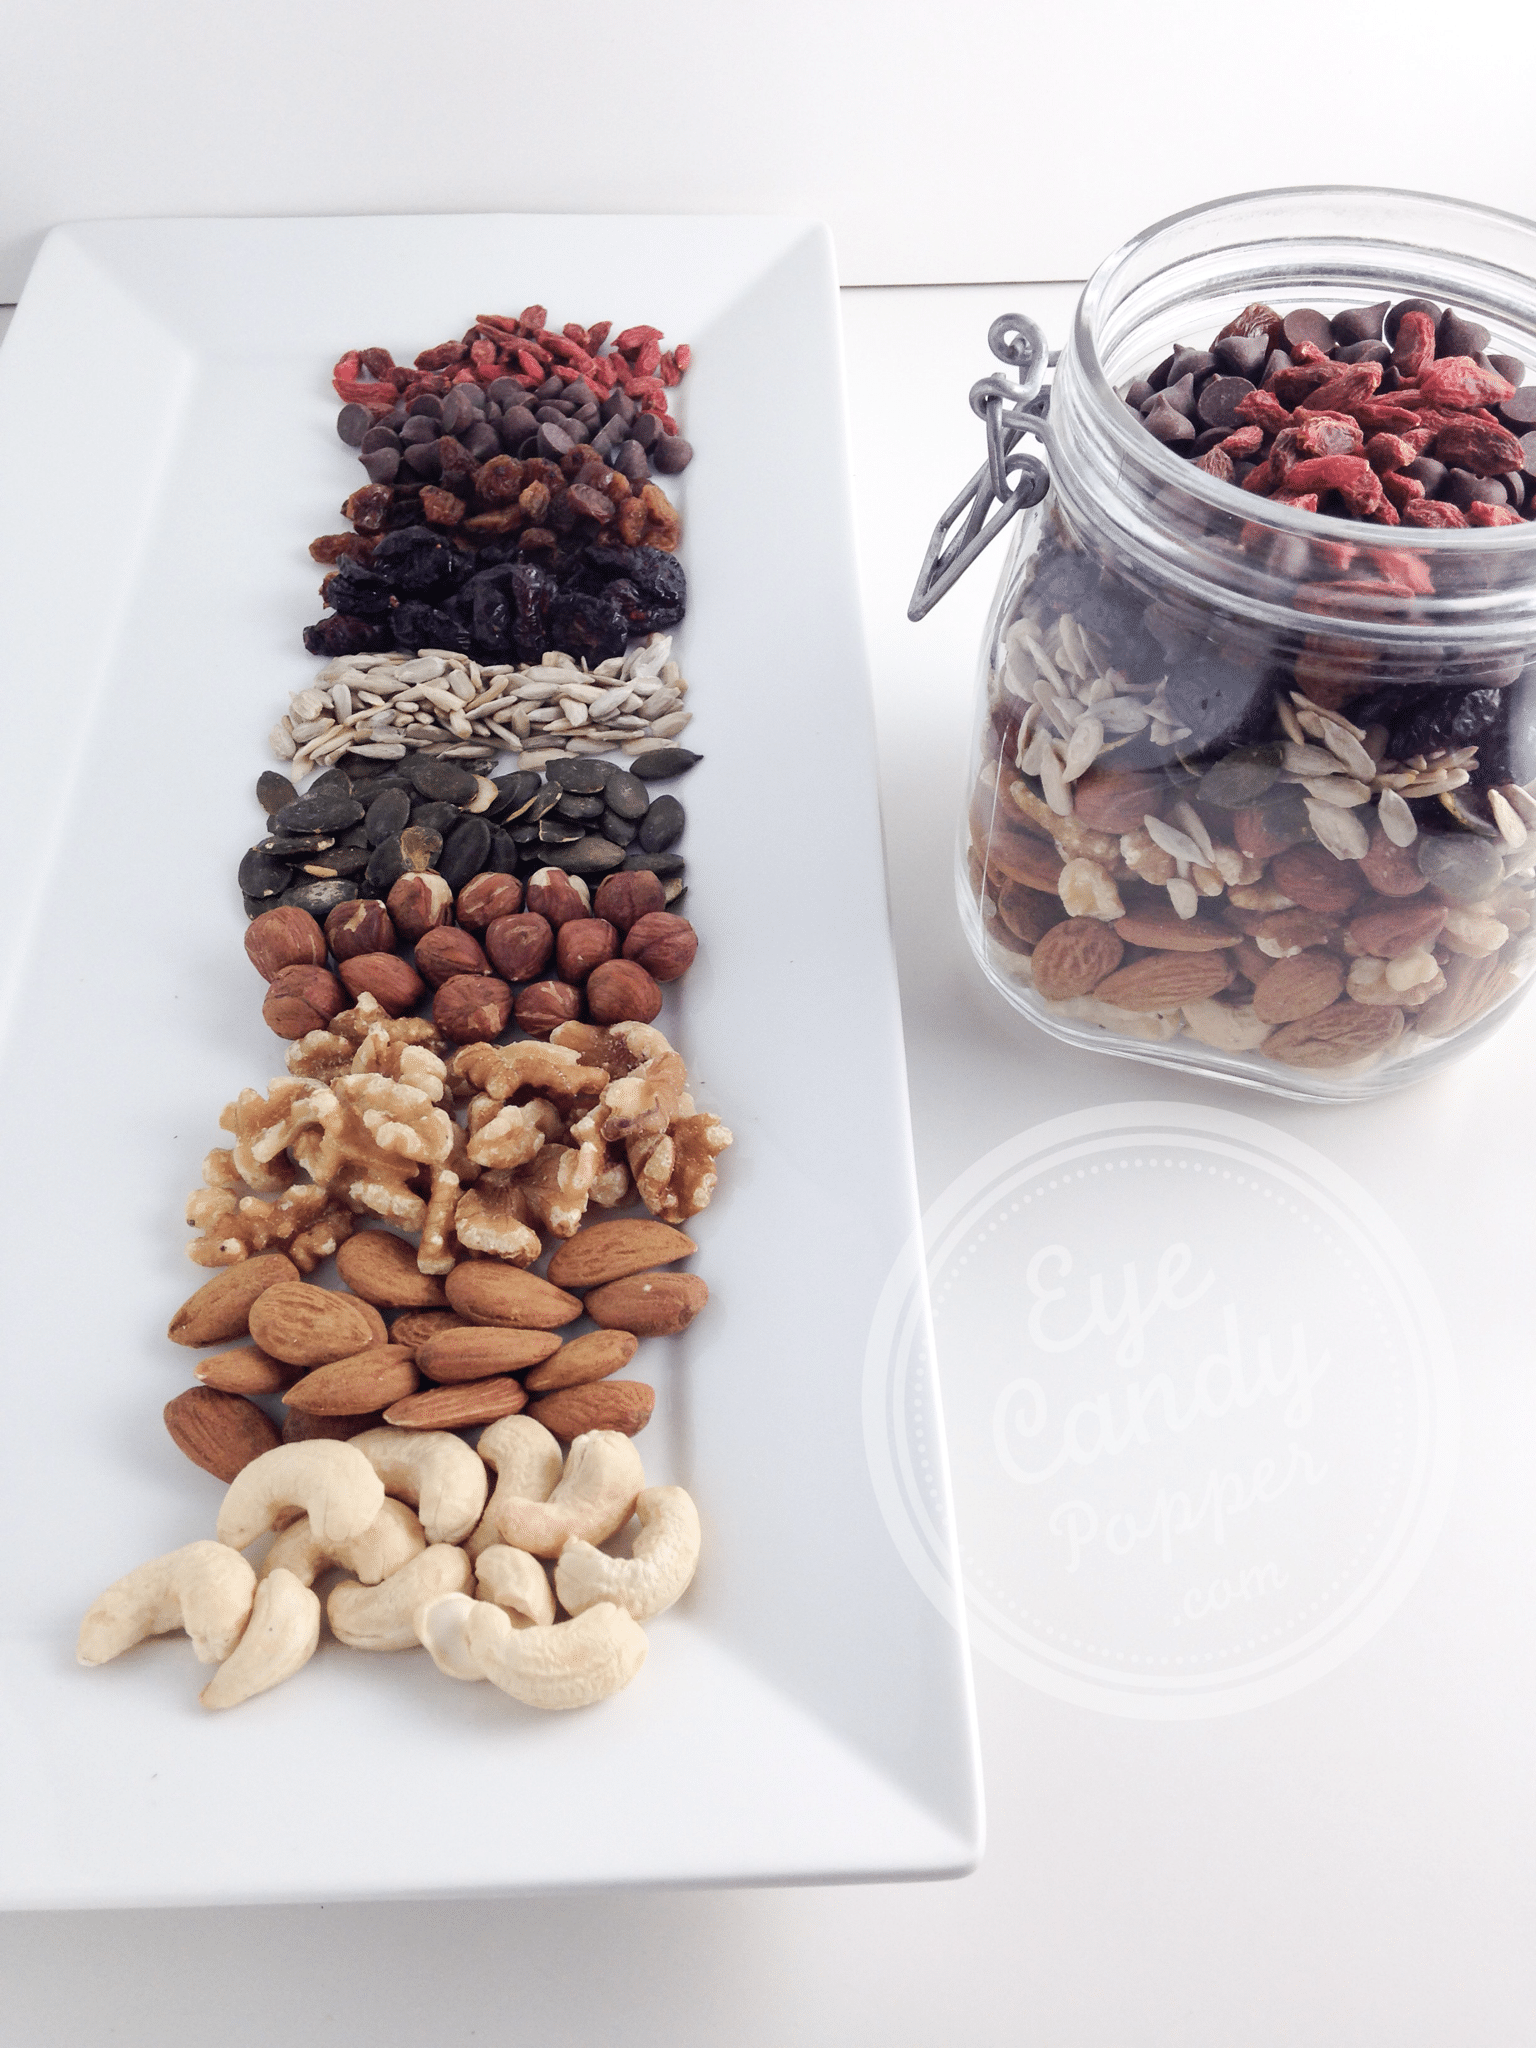 How to make your own healthy trail mix, and why raw organic is better